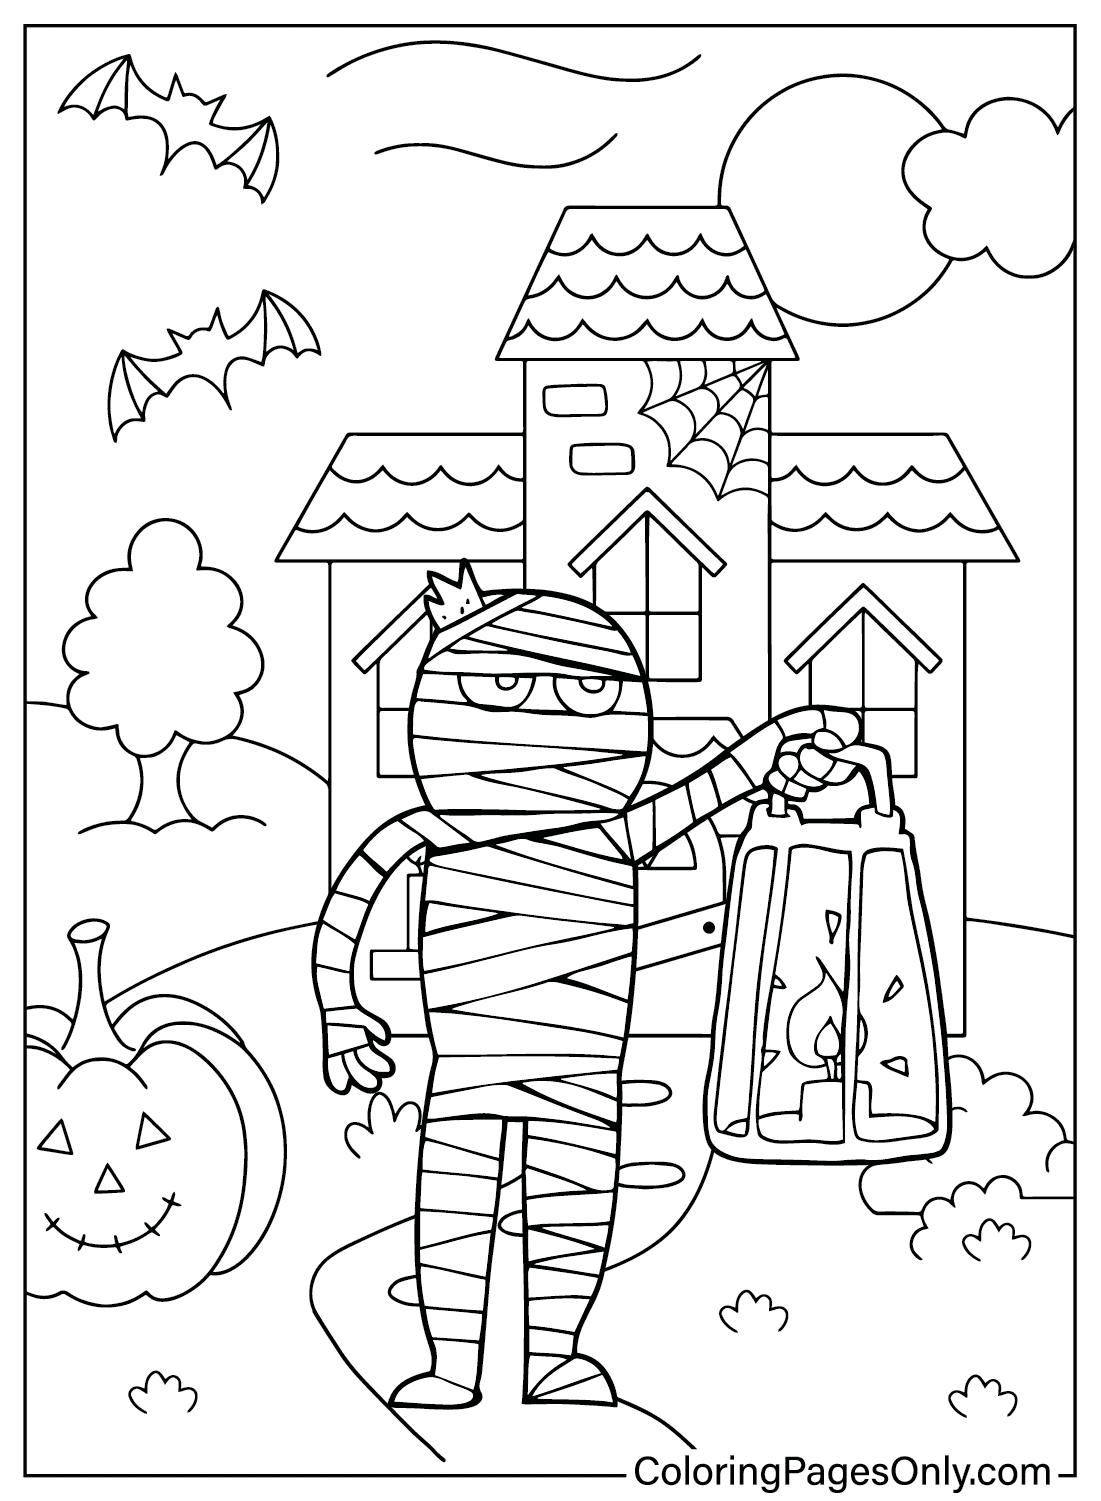 Mummy Coloring Pages - Free Printable Coloring Pages